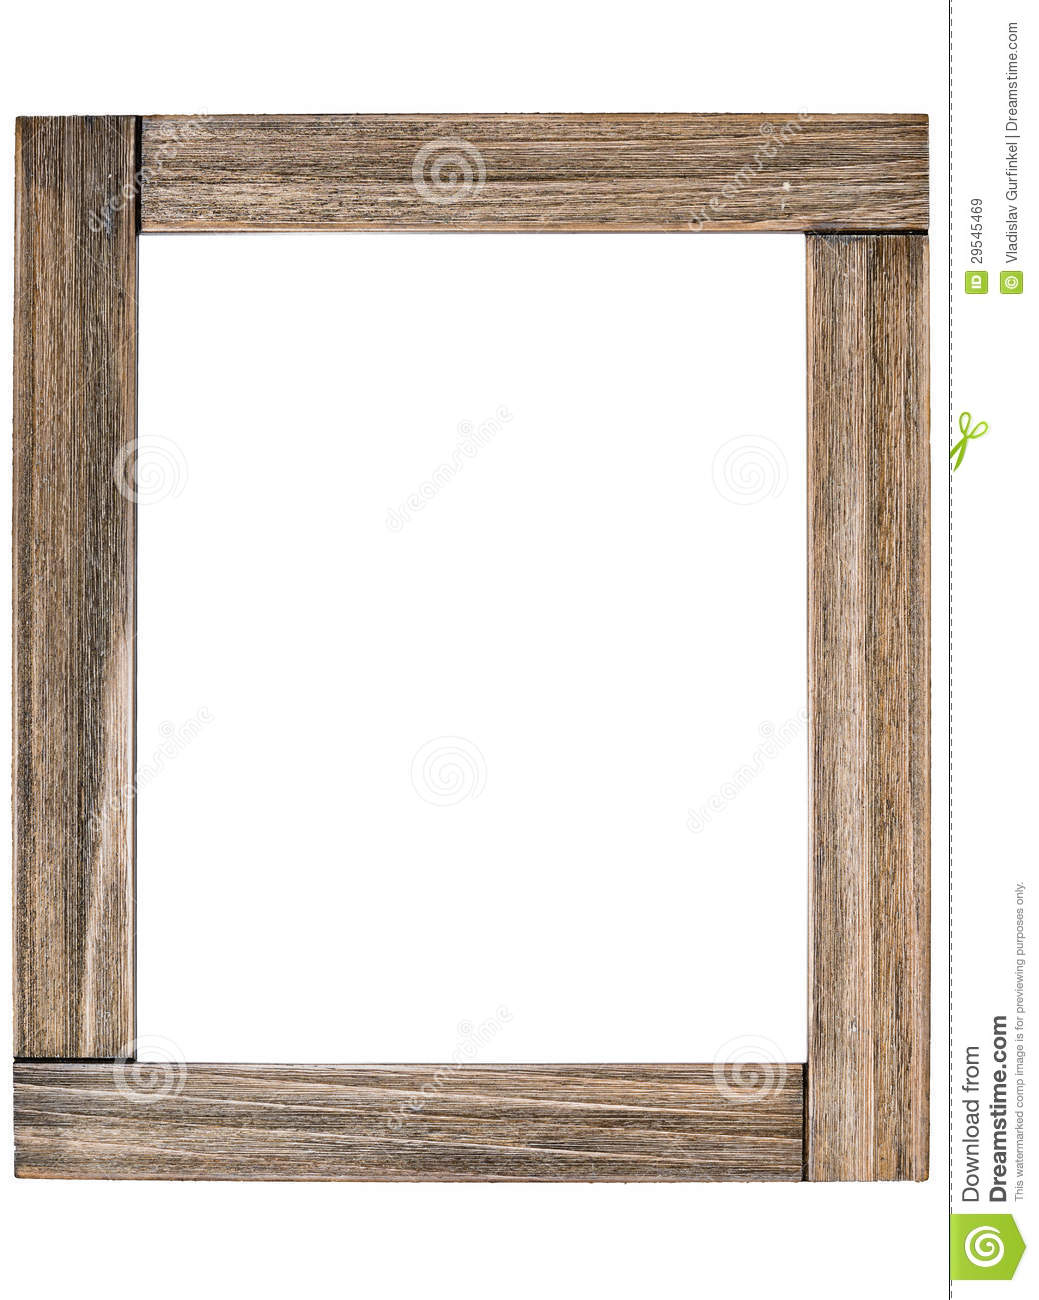 rustic frame clipart - photo #22